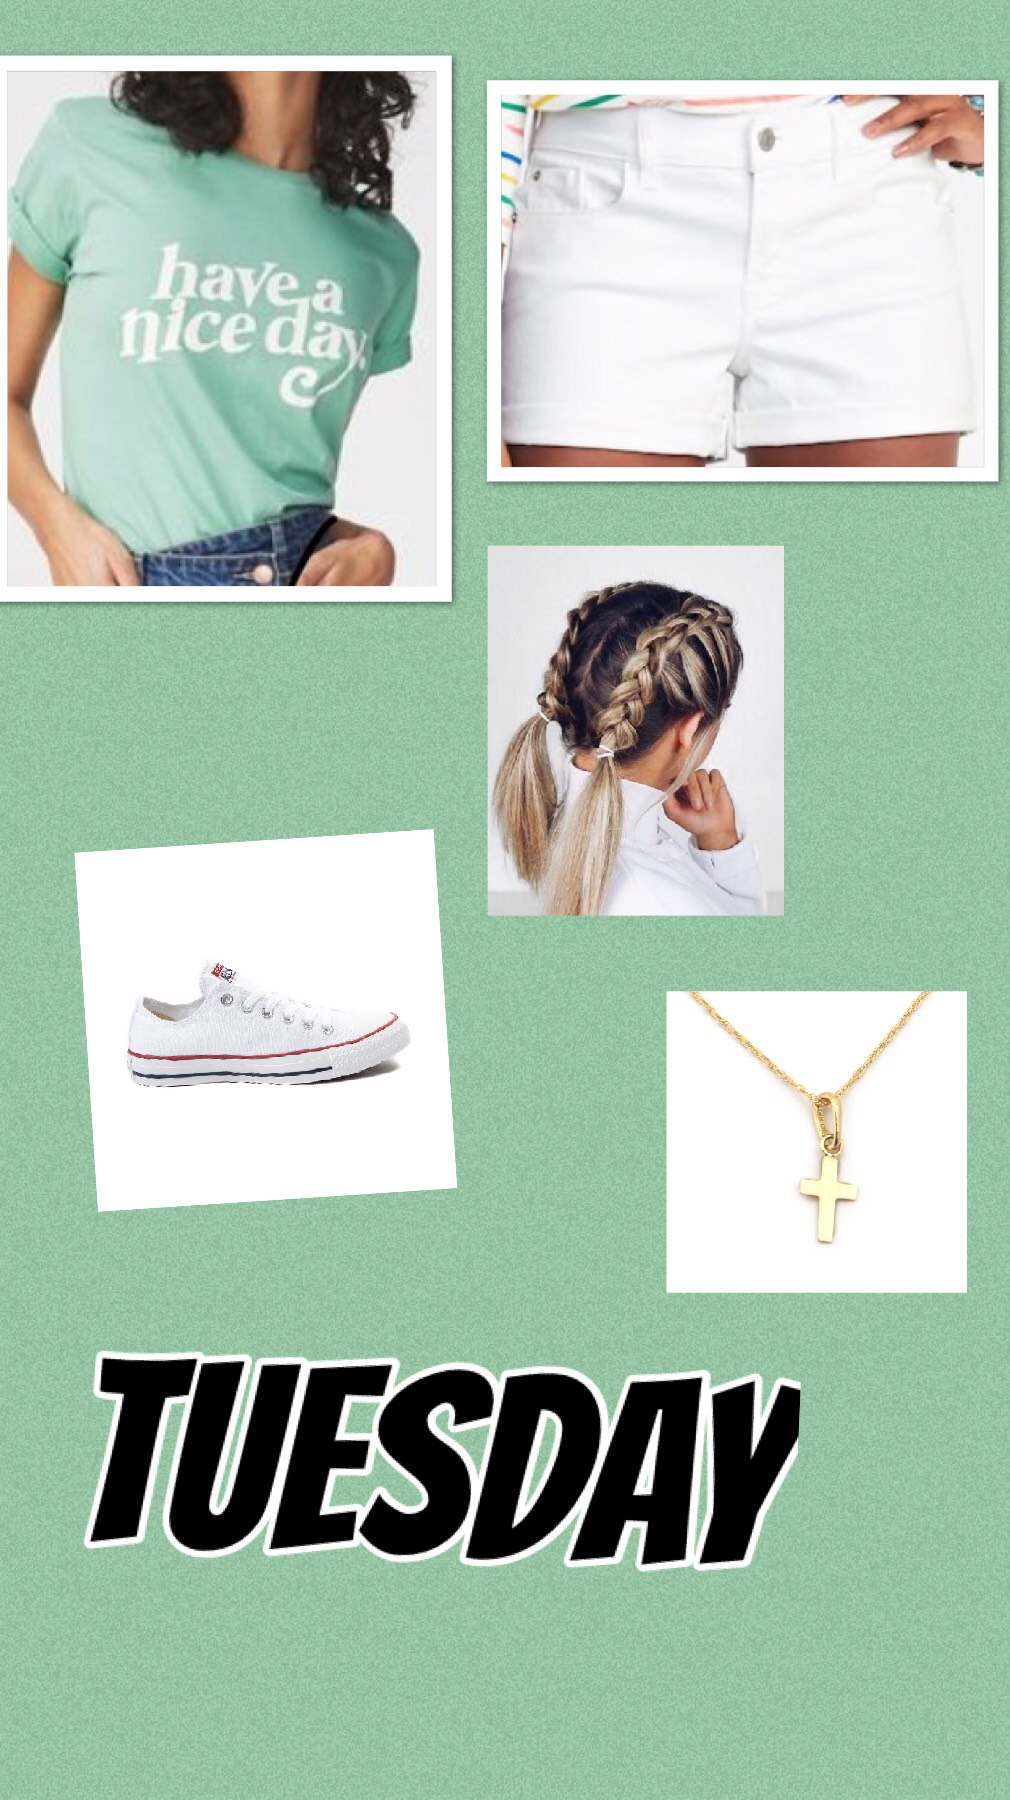 Tuesday: shirt-cotton on Shorts- old navy  Hair- French braid ponytail Shoe- converse  Necklace- Amazon